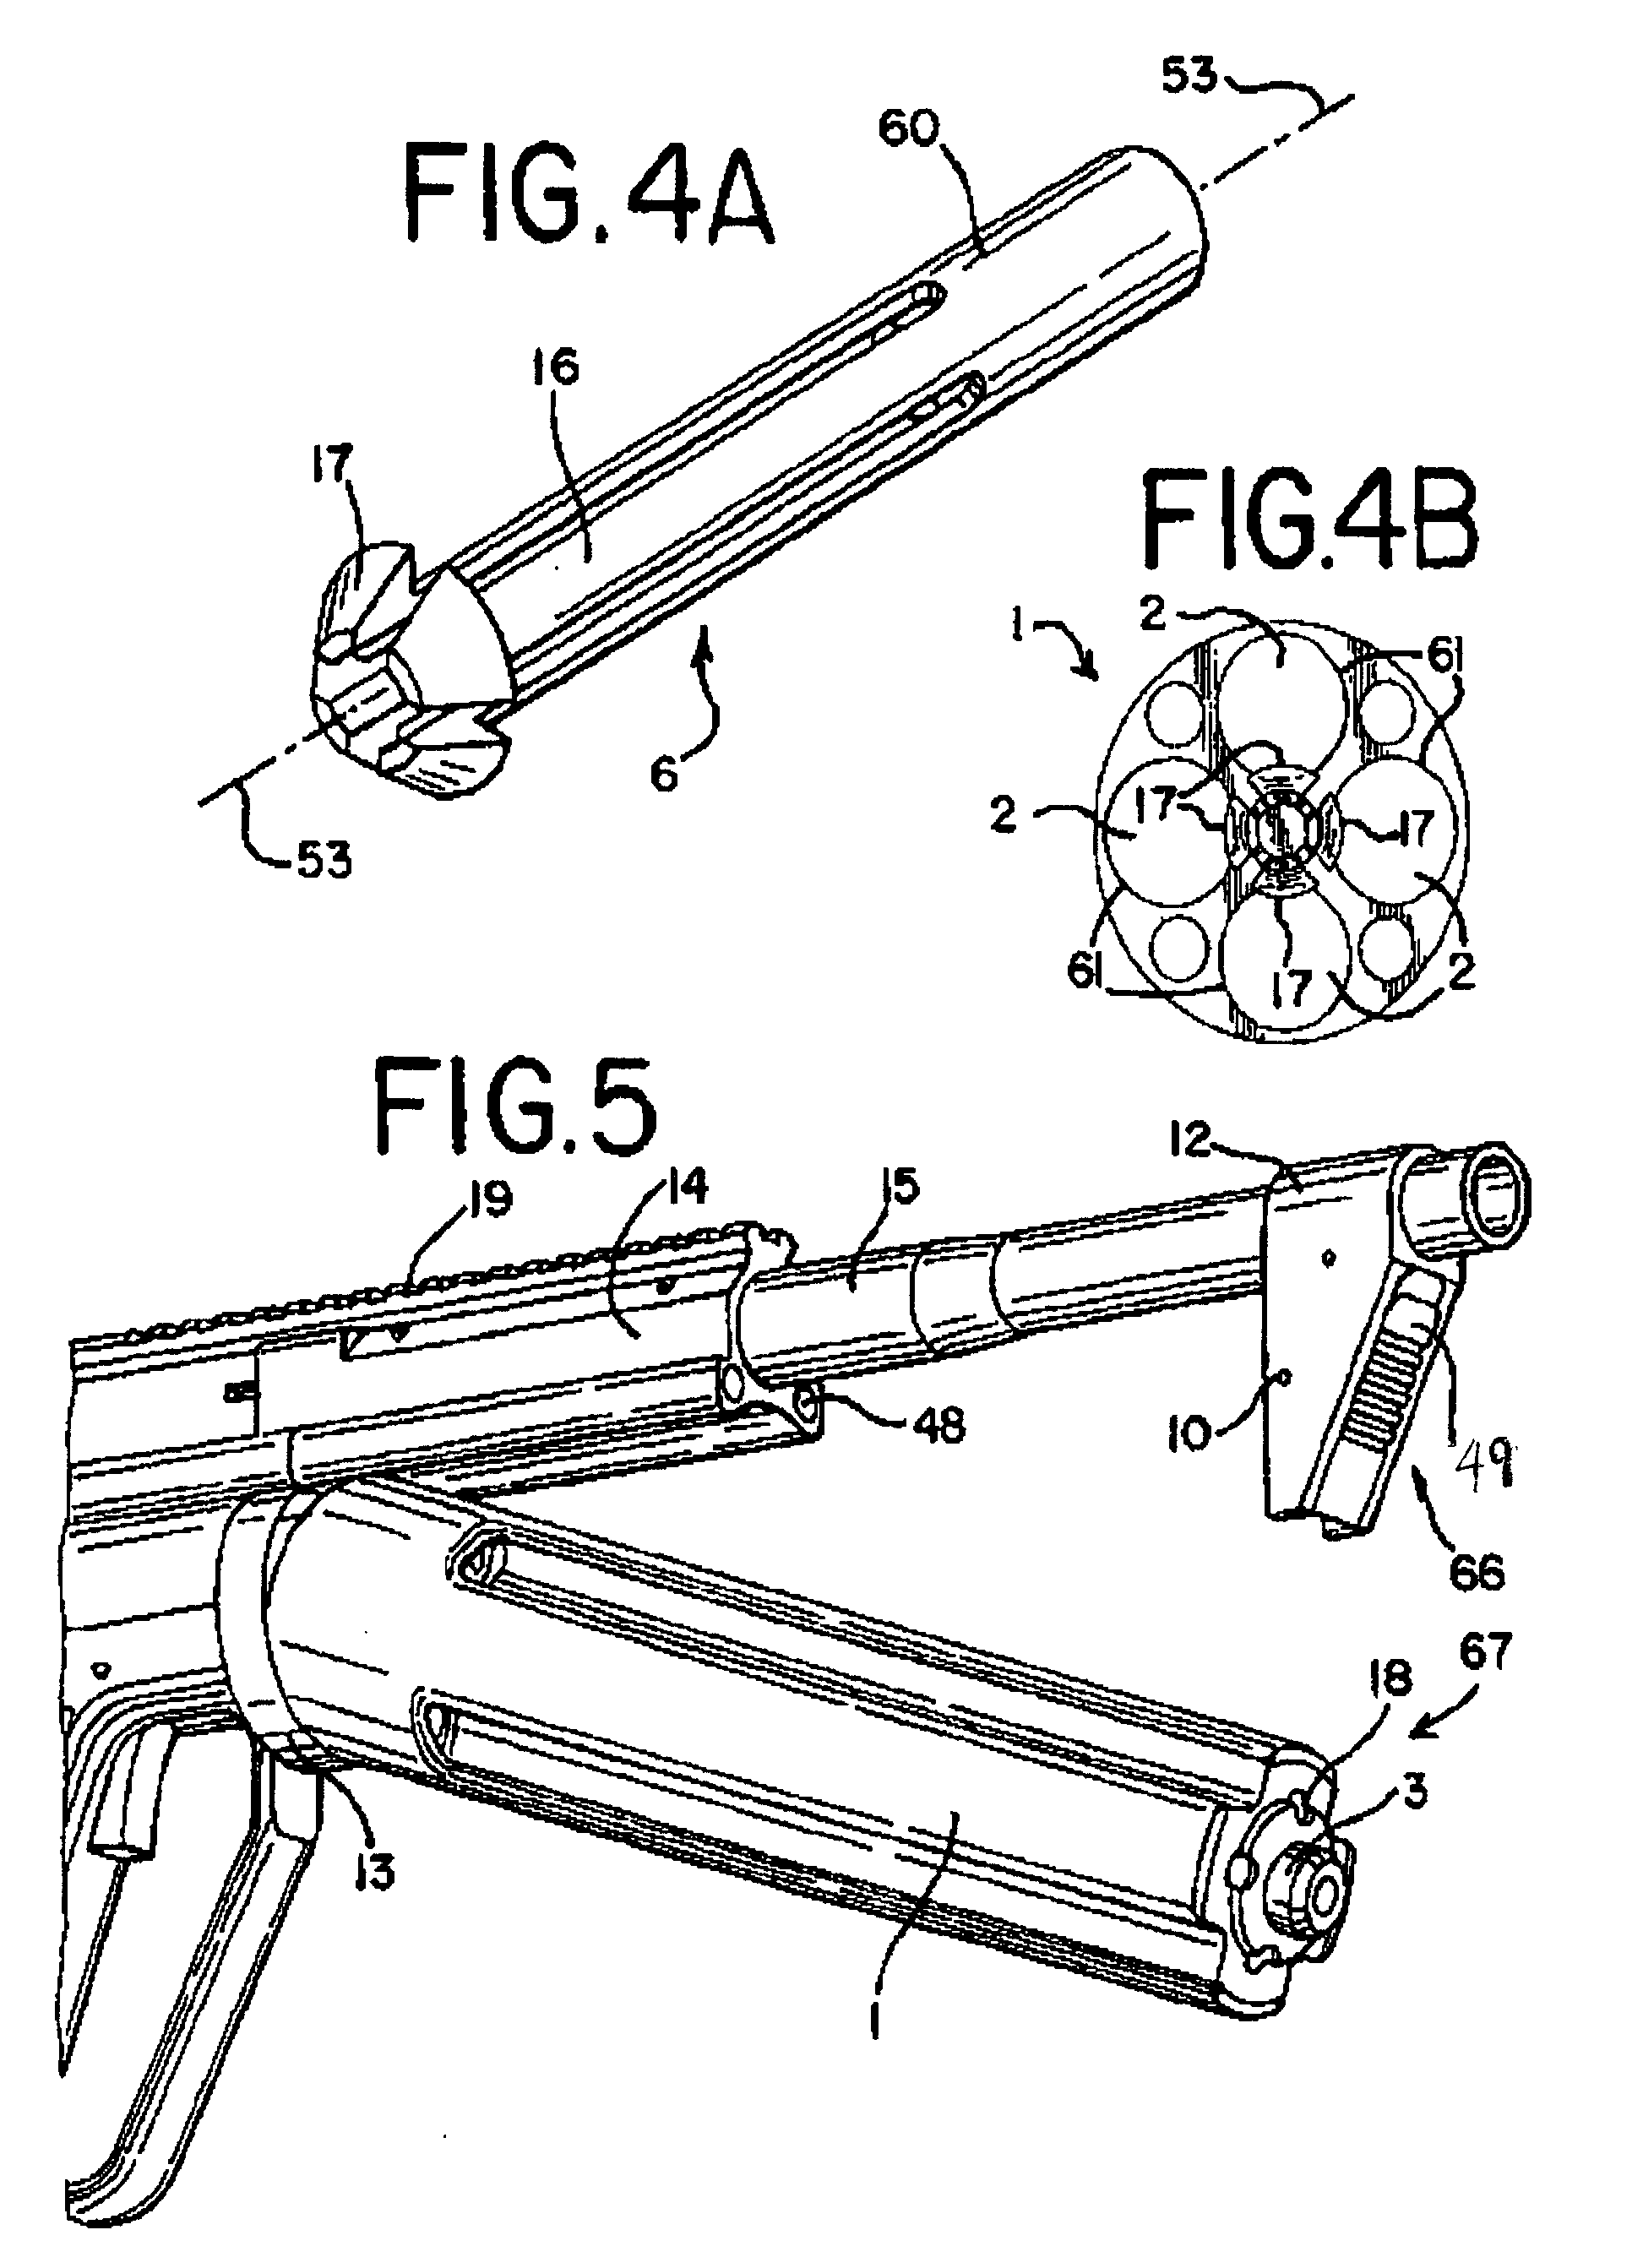 System and method for loading and feeding a shotgun